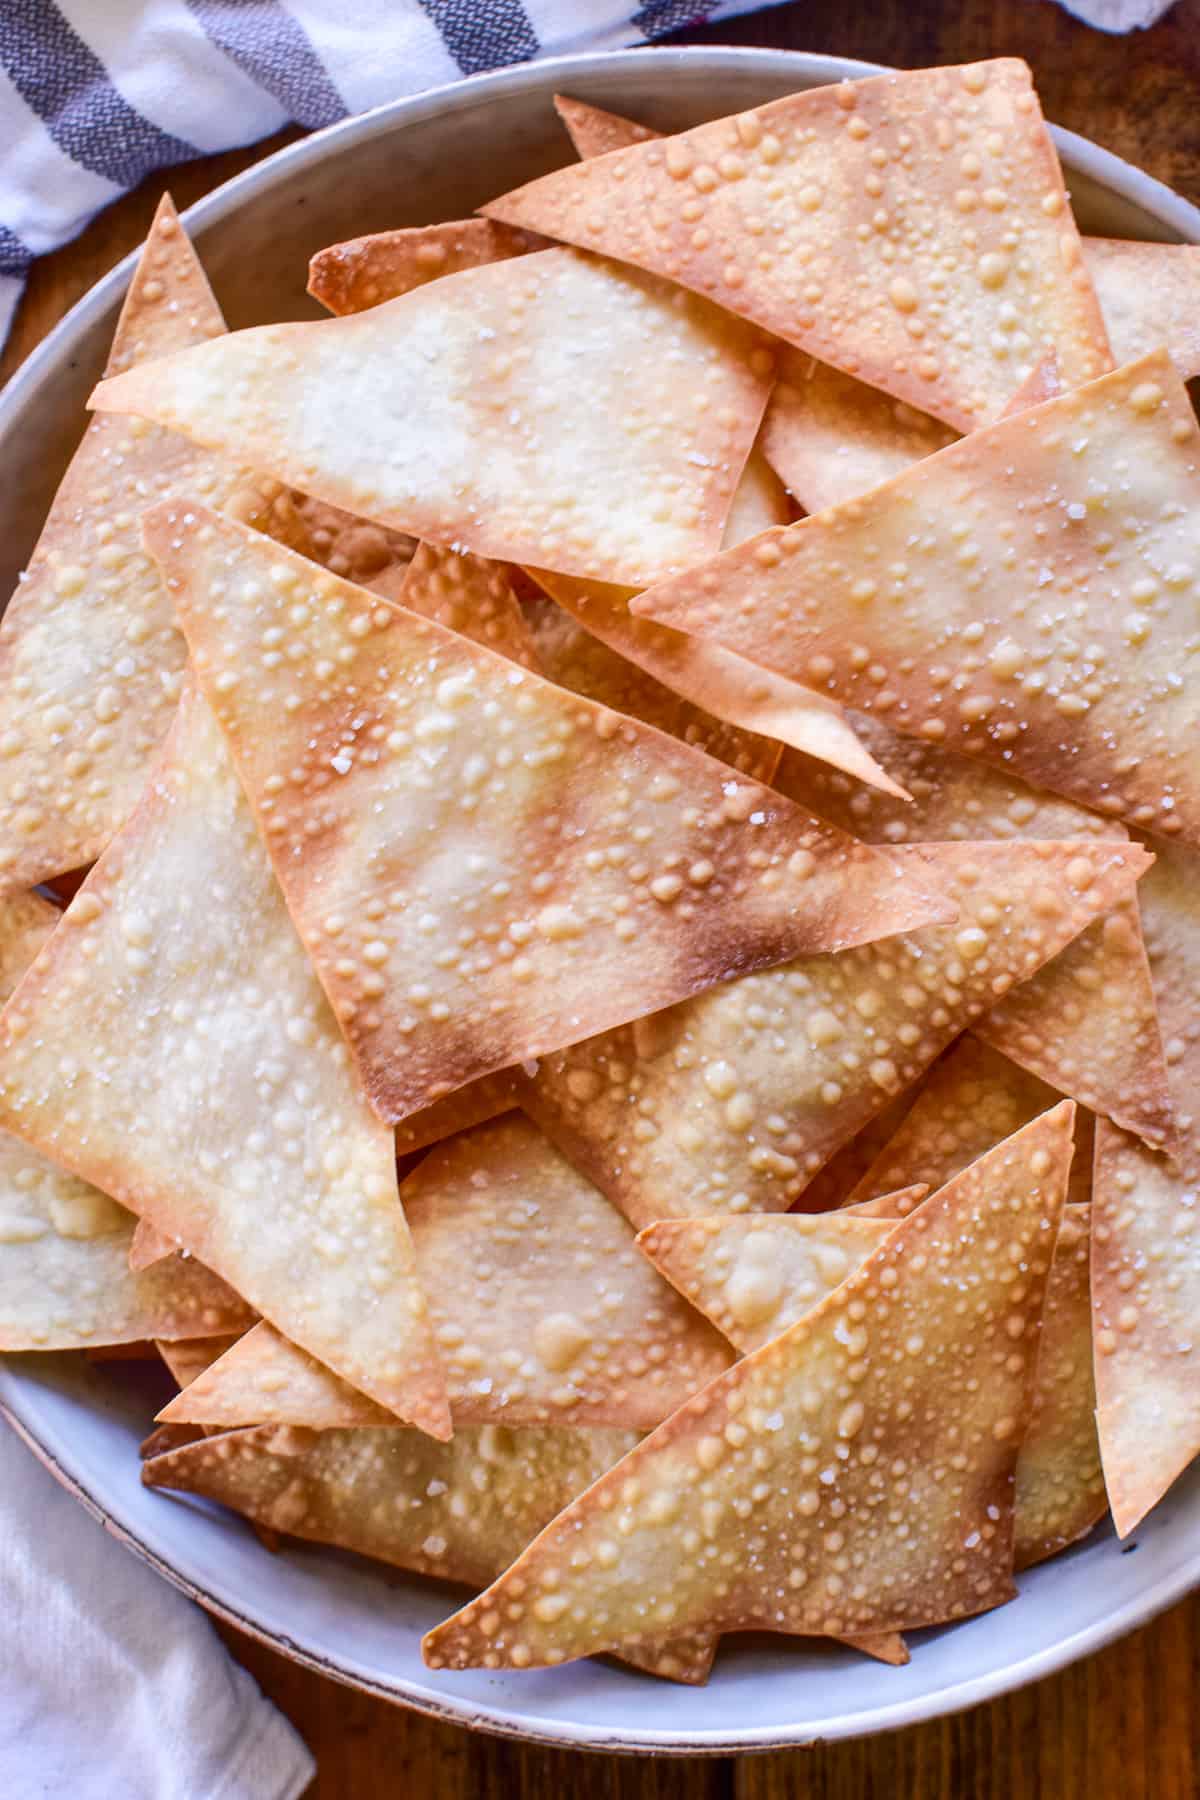 Close-up of Wonton Chips in a gray bowl with a gray and white striped towel